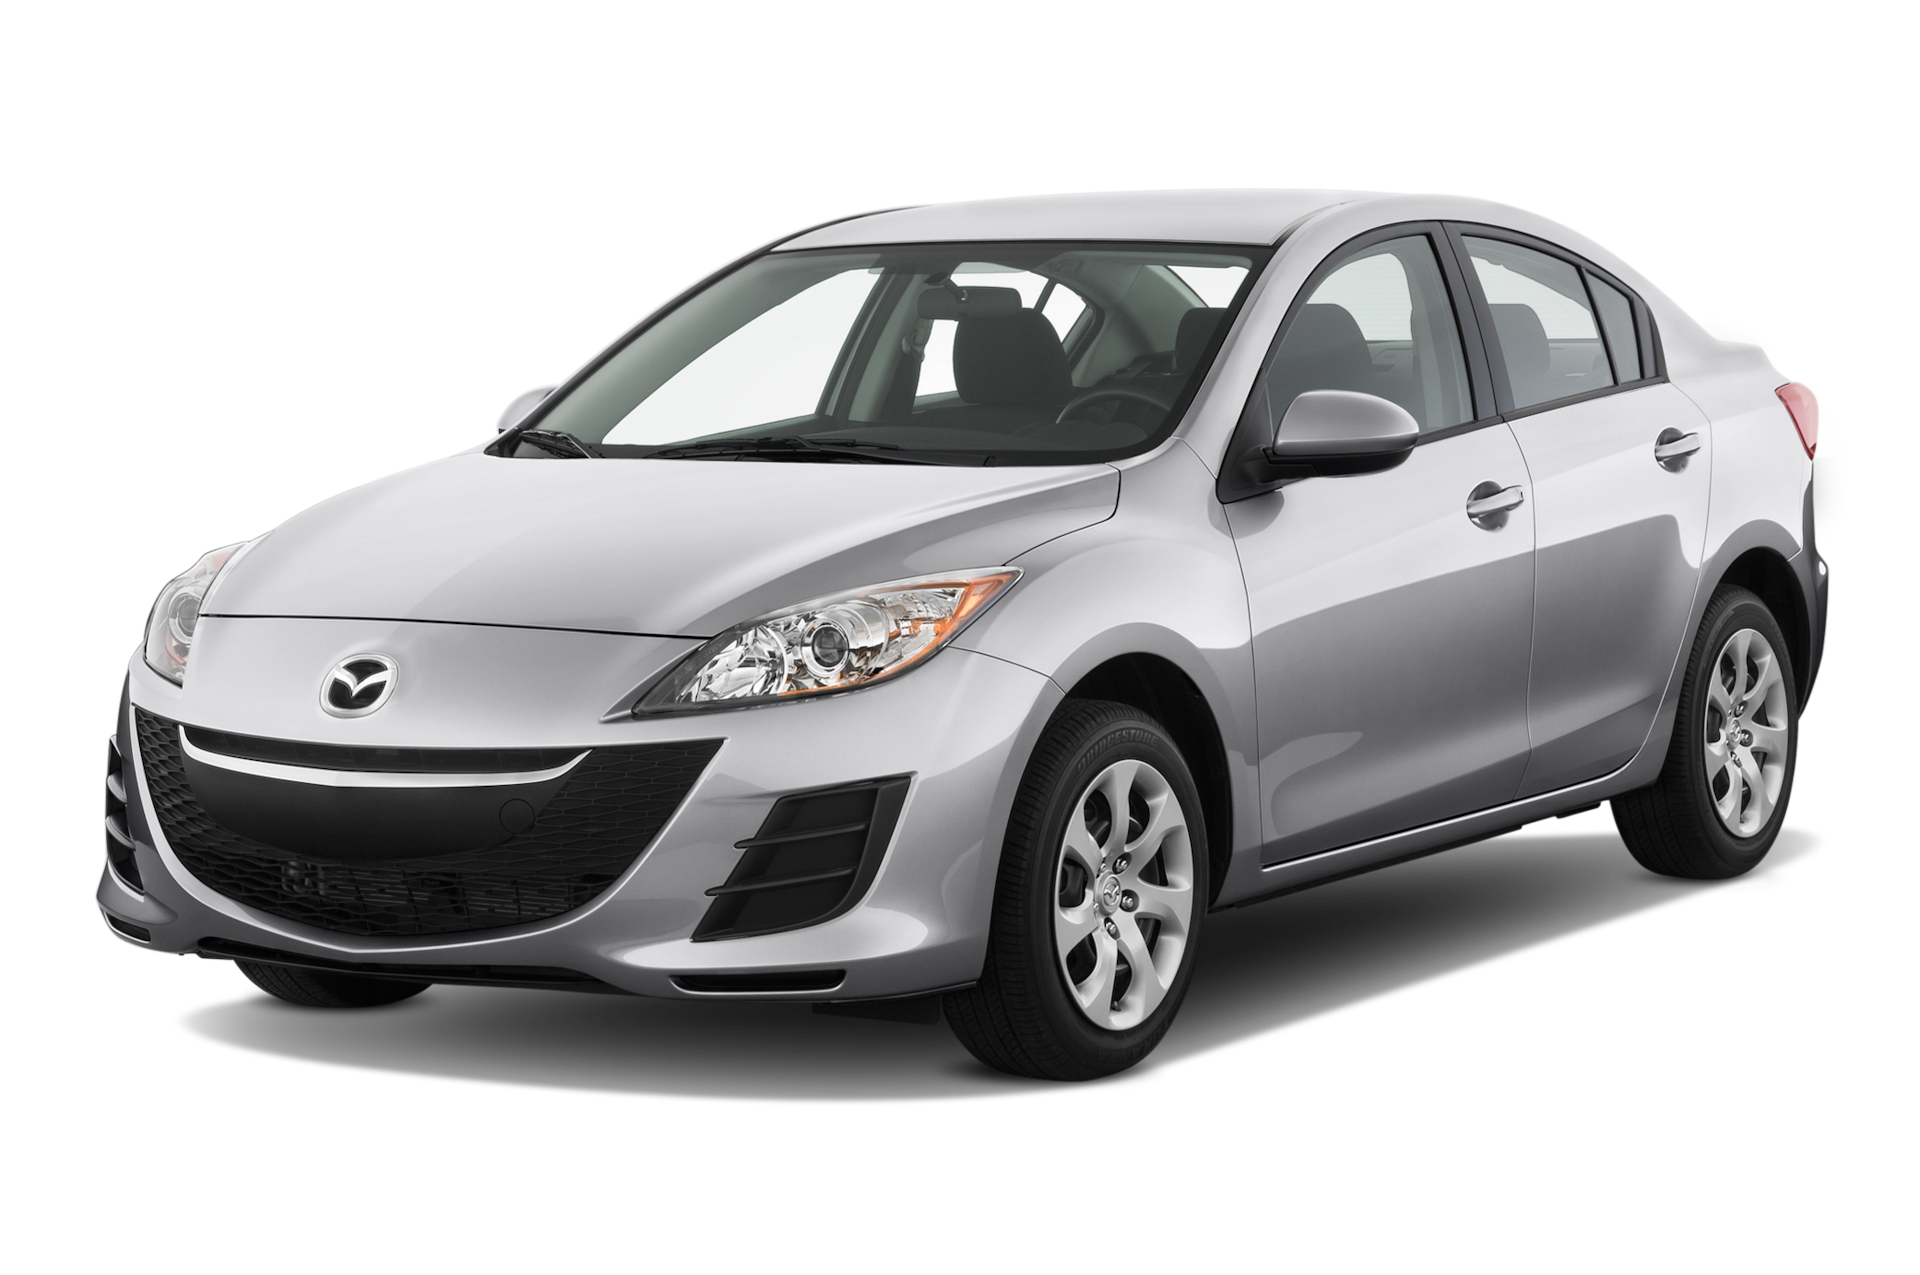 2010 Mazda Mazda3 Prices, Reviews, and Photos - MotorTrend